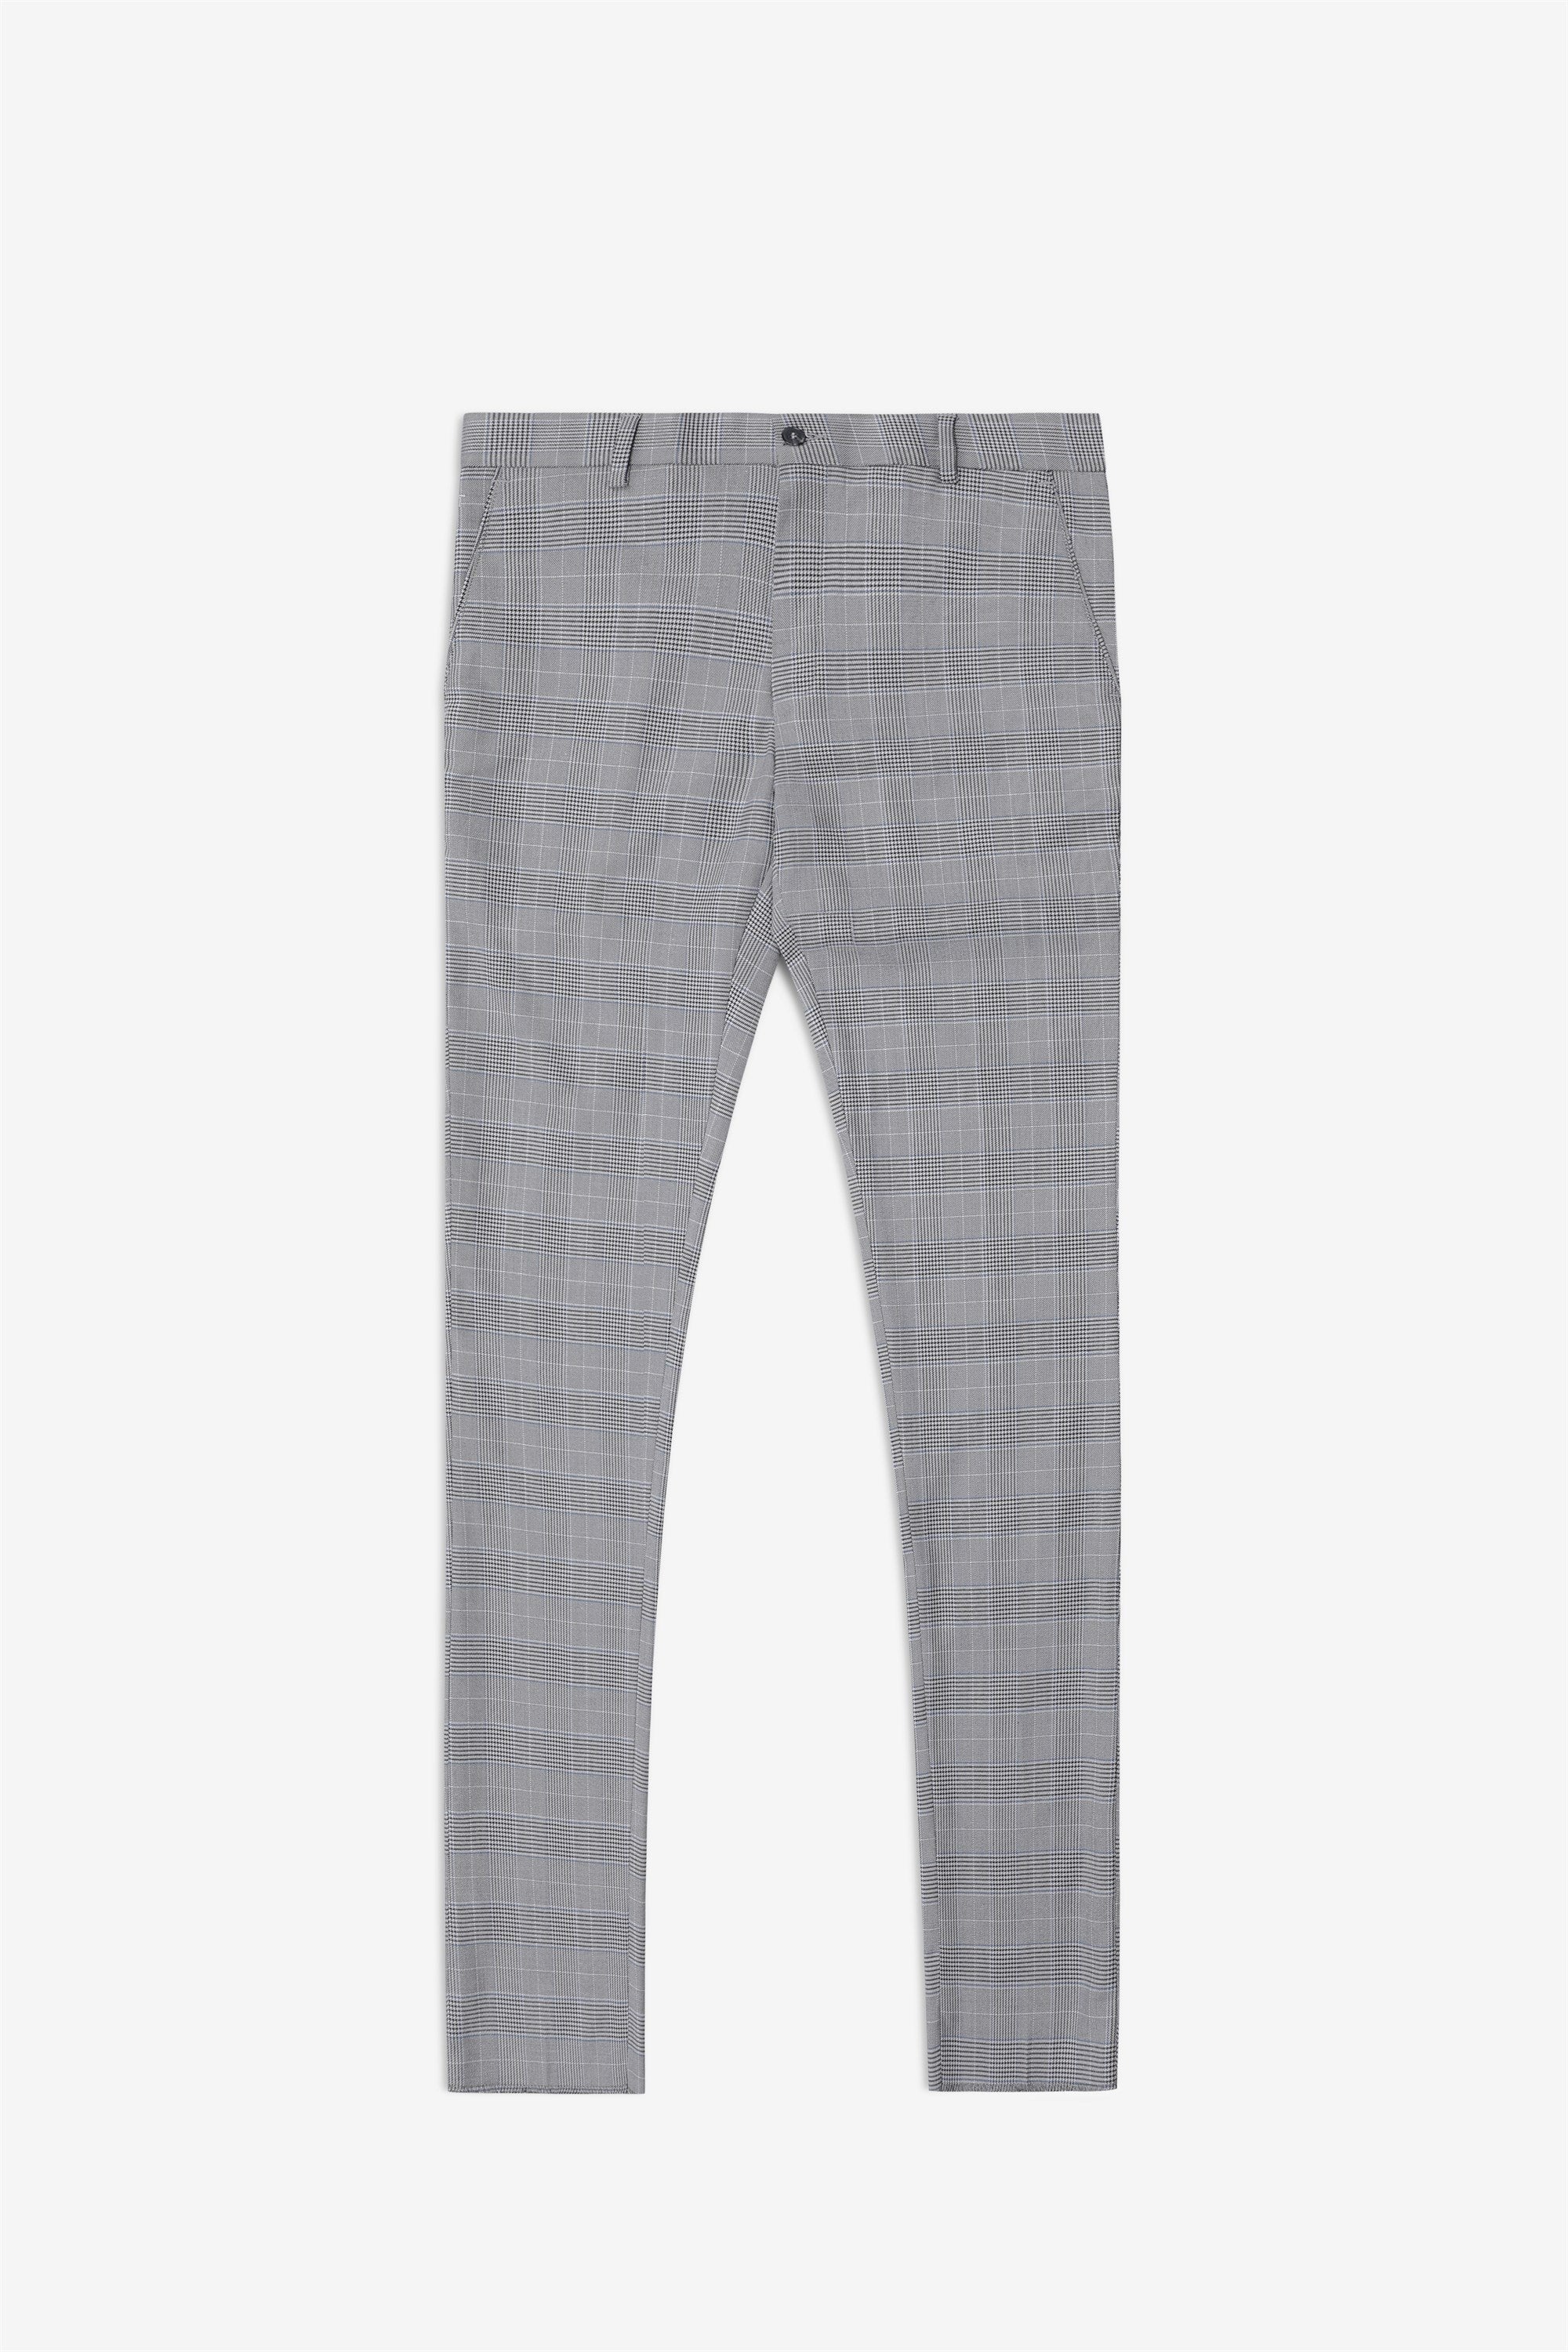 T the brand Stretch Formal Check Trouser - Black